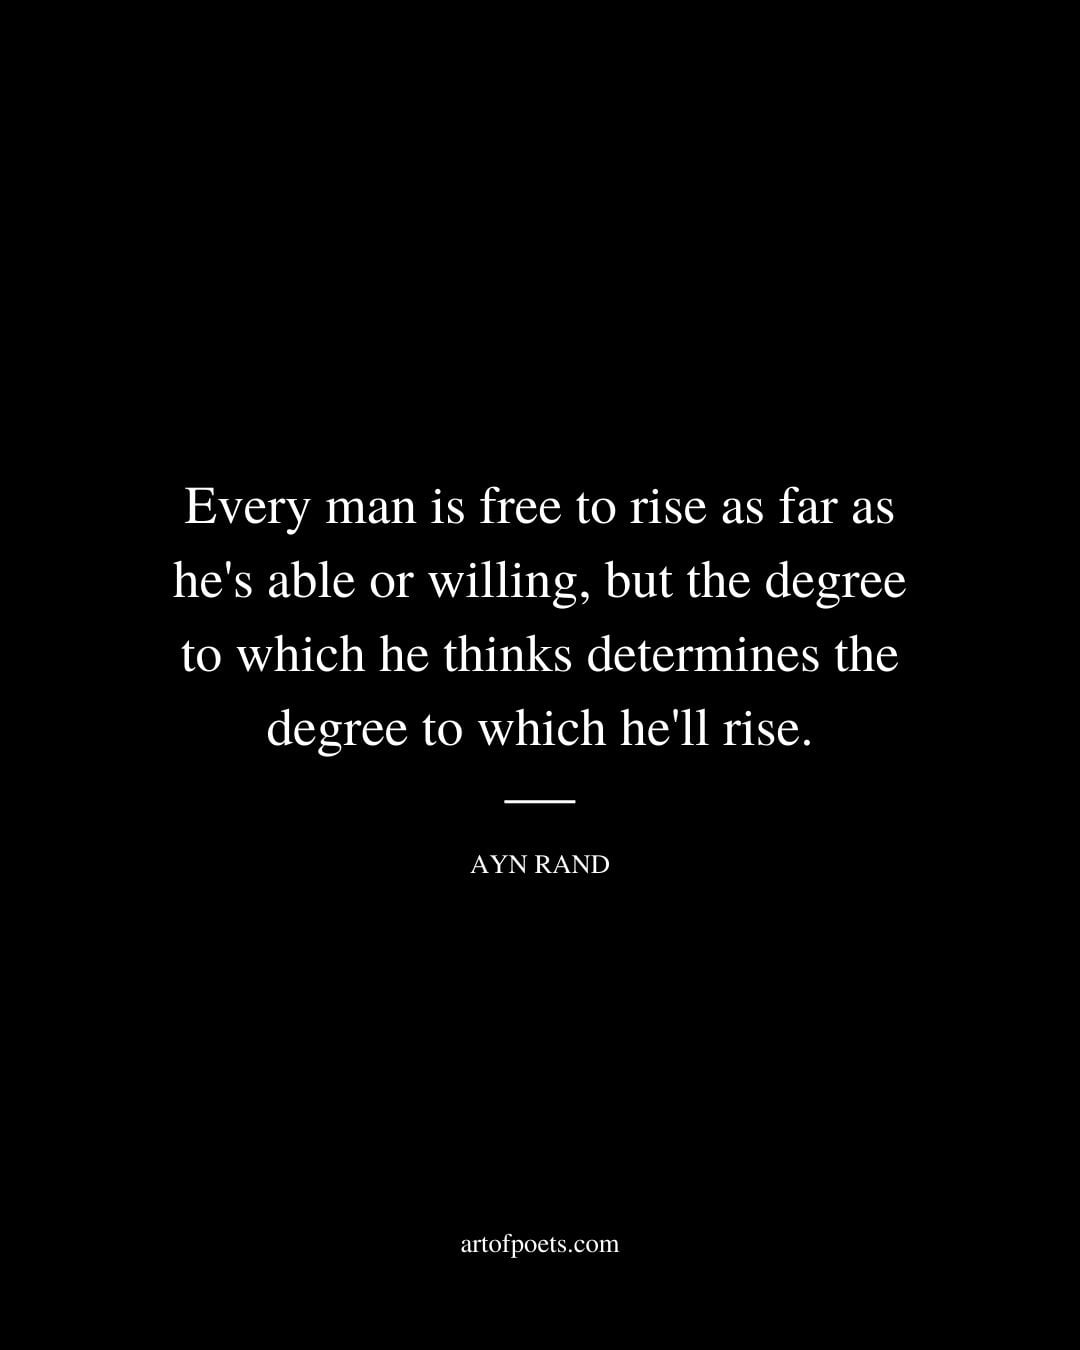 Every man is free to rise as far as hes able or willing but the degree to which he thinks determines the degree to which hell rise